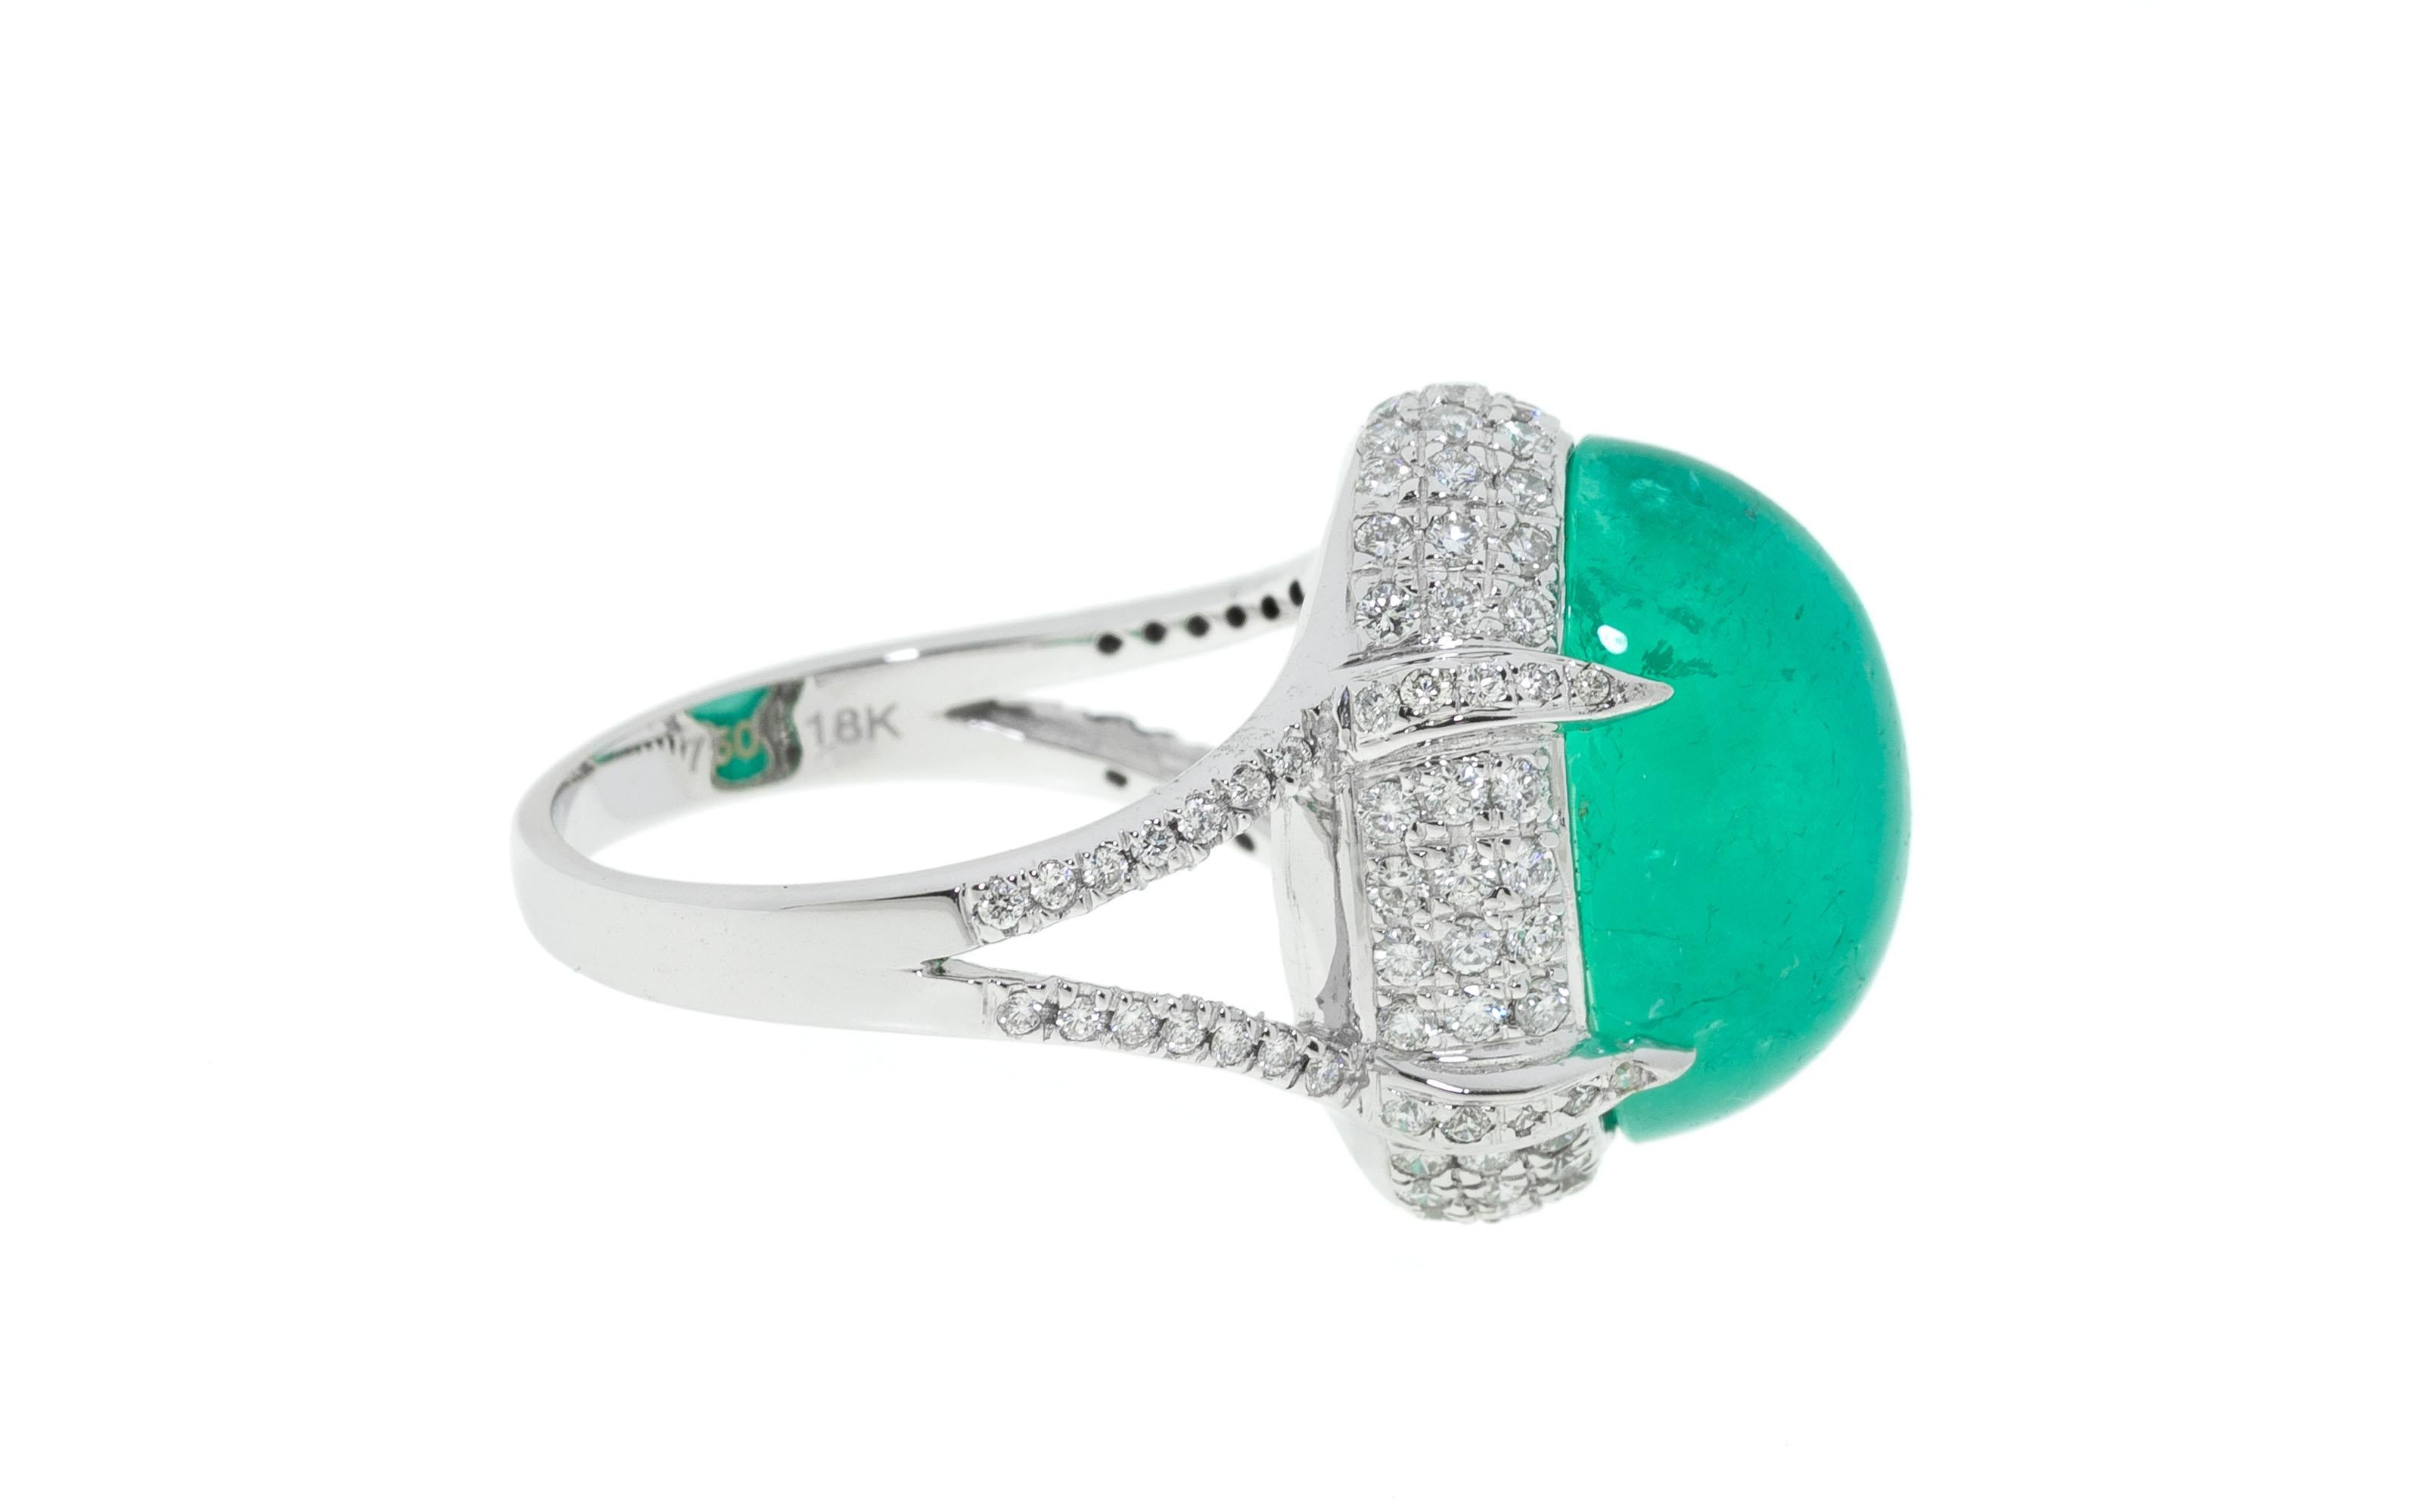 Cabochon 10.74 Ct Emerald Diamond 18 K White Gold Cocktail Ring For Sale